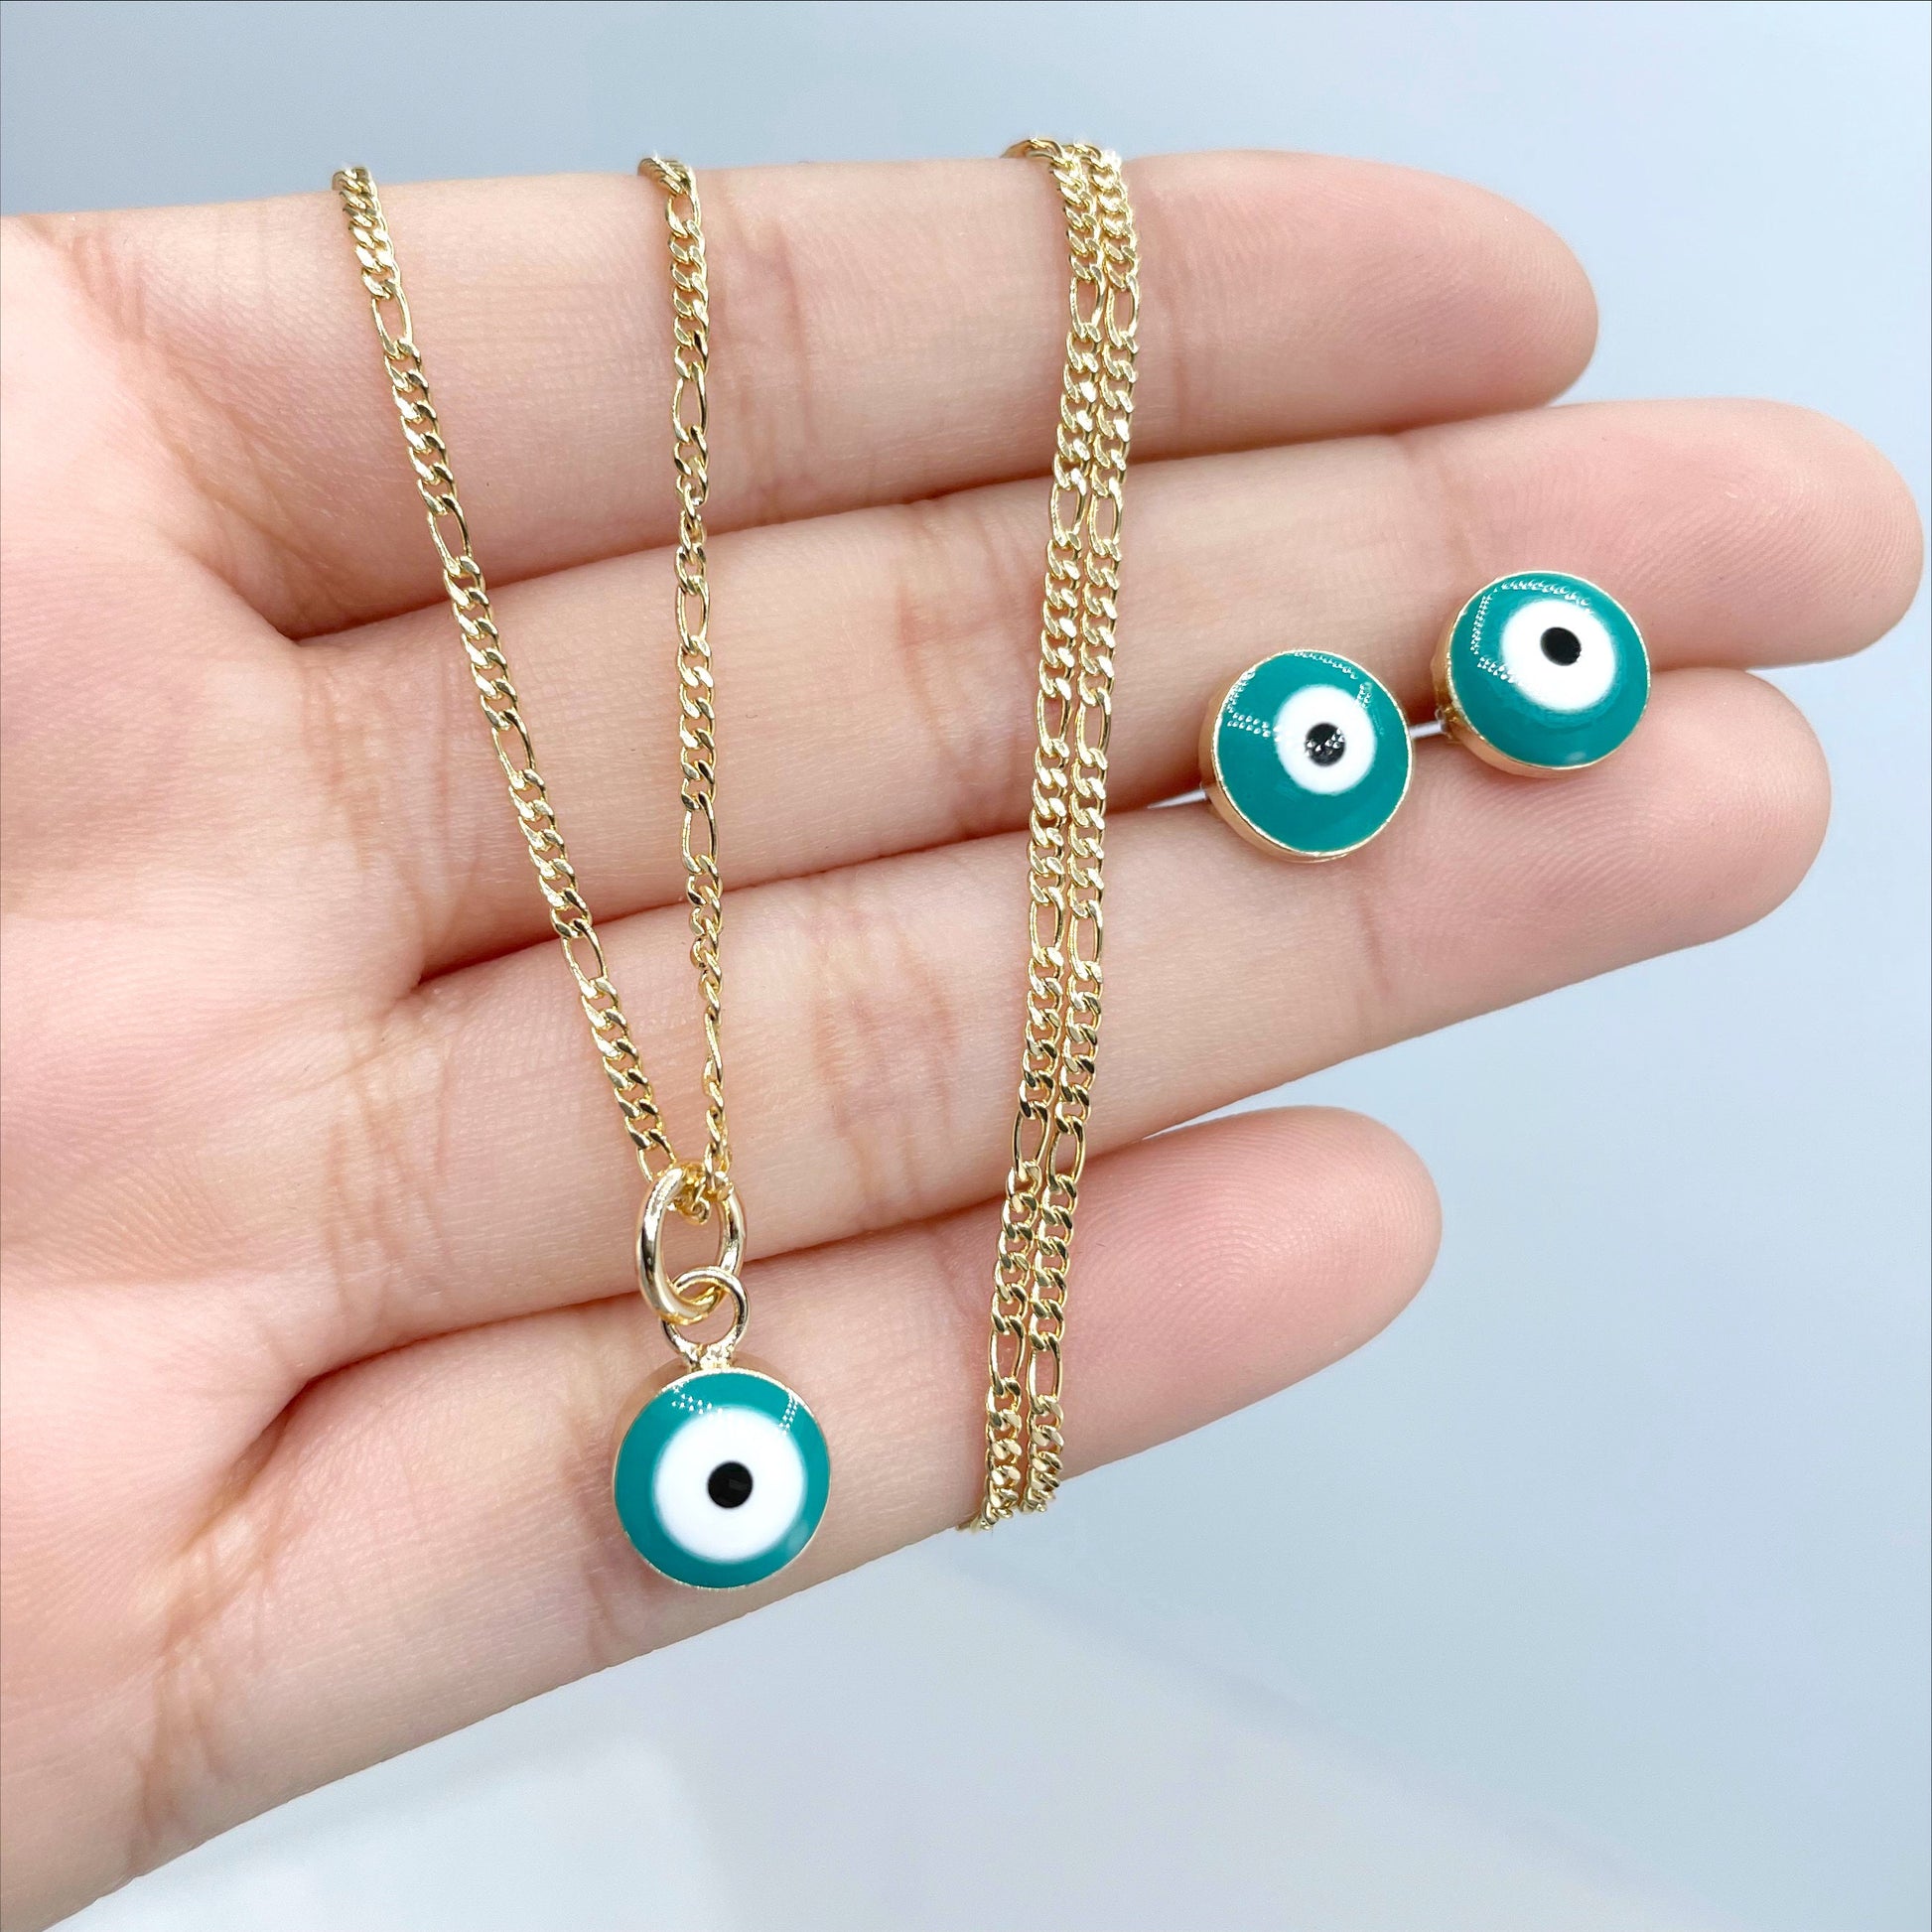 18k Gold Filled 1mm Figaro Link Dainty Chain, Teal Blue Greek Evil Eyes Earrings or Charm, Small or Medium, Wholesale Jewelry Supplies